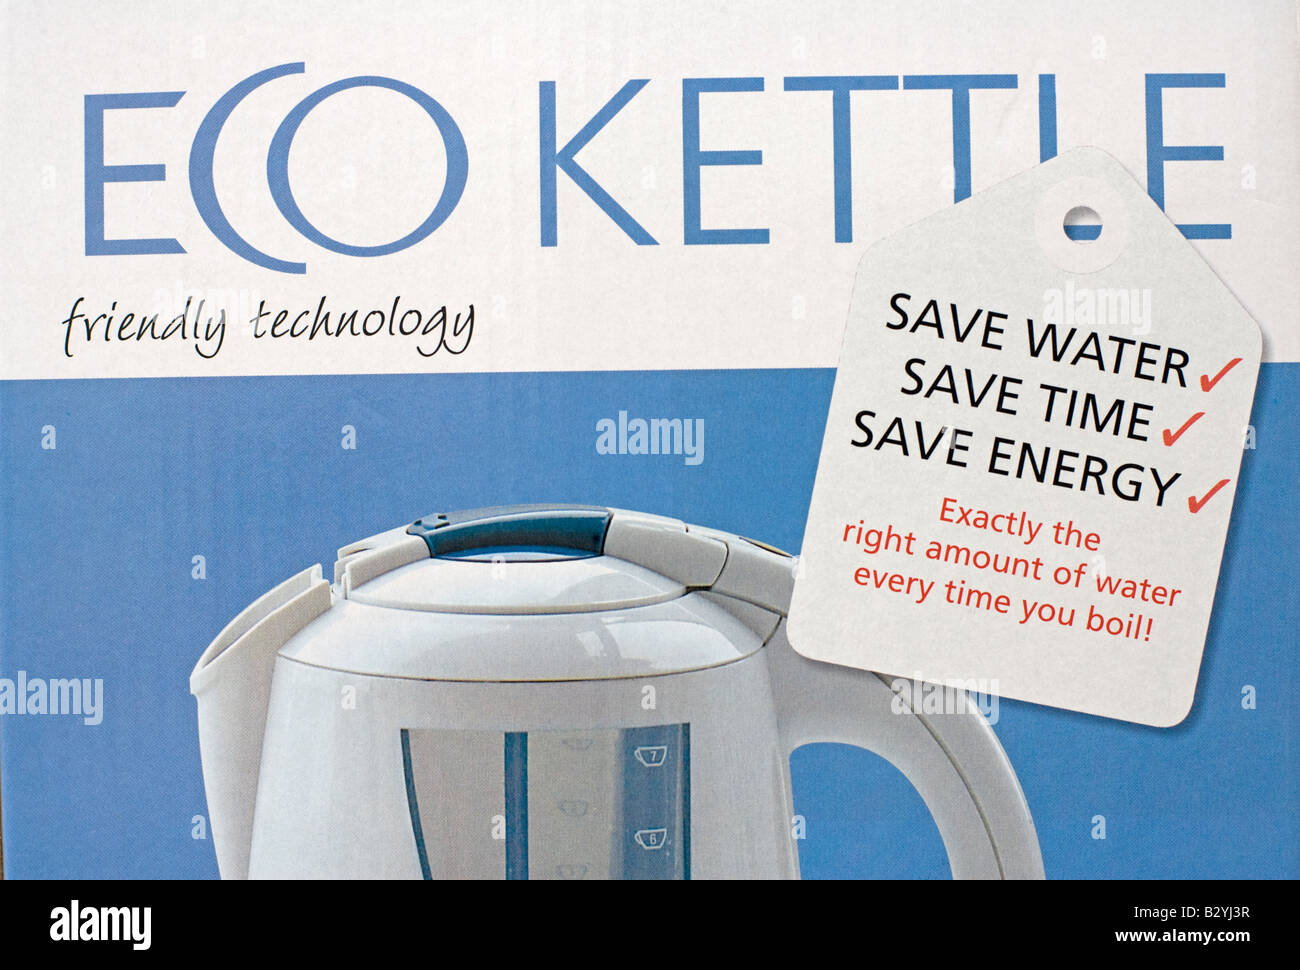 Eco kettle energy saving recommended save energy water and time UK Stock Photo